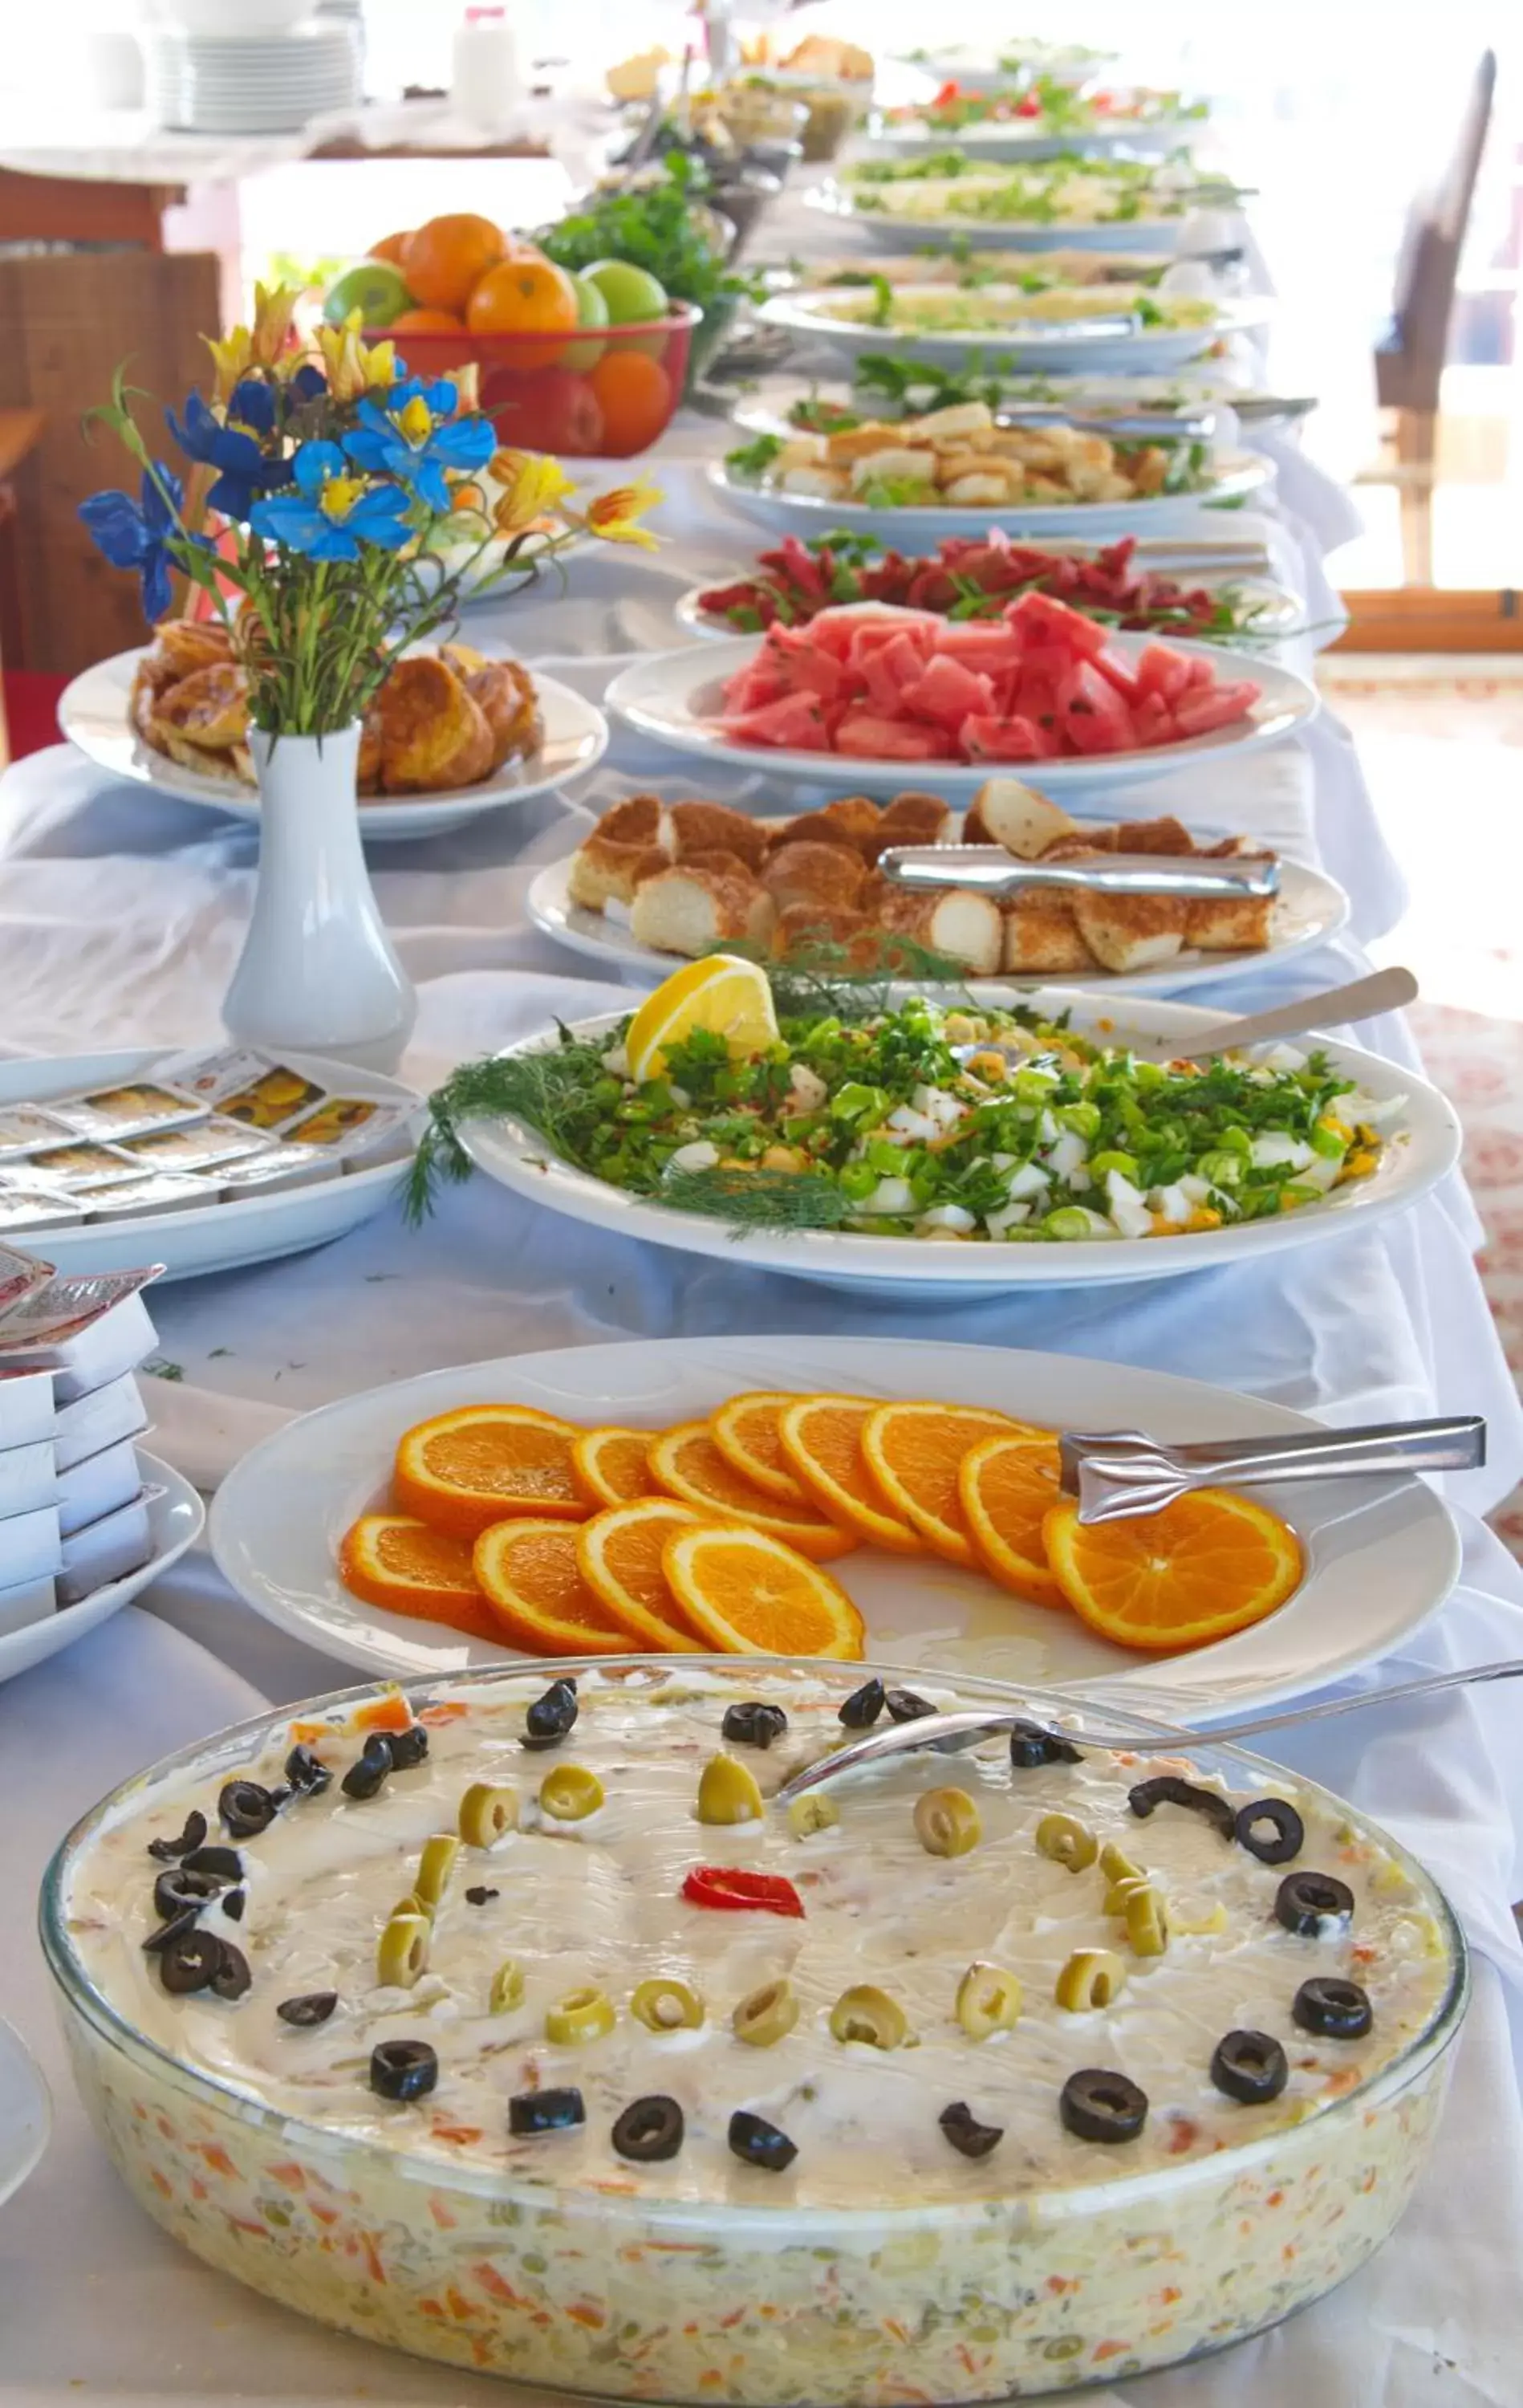 Banquet/Function facilities, Food in Blue Tuana Hotel